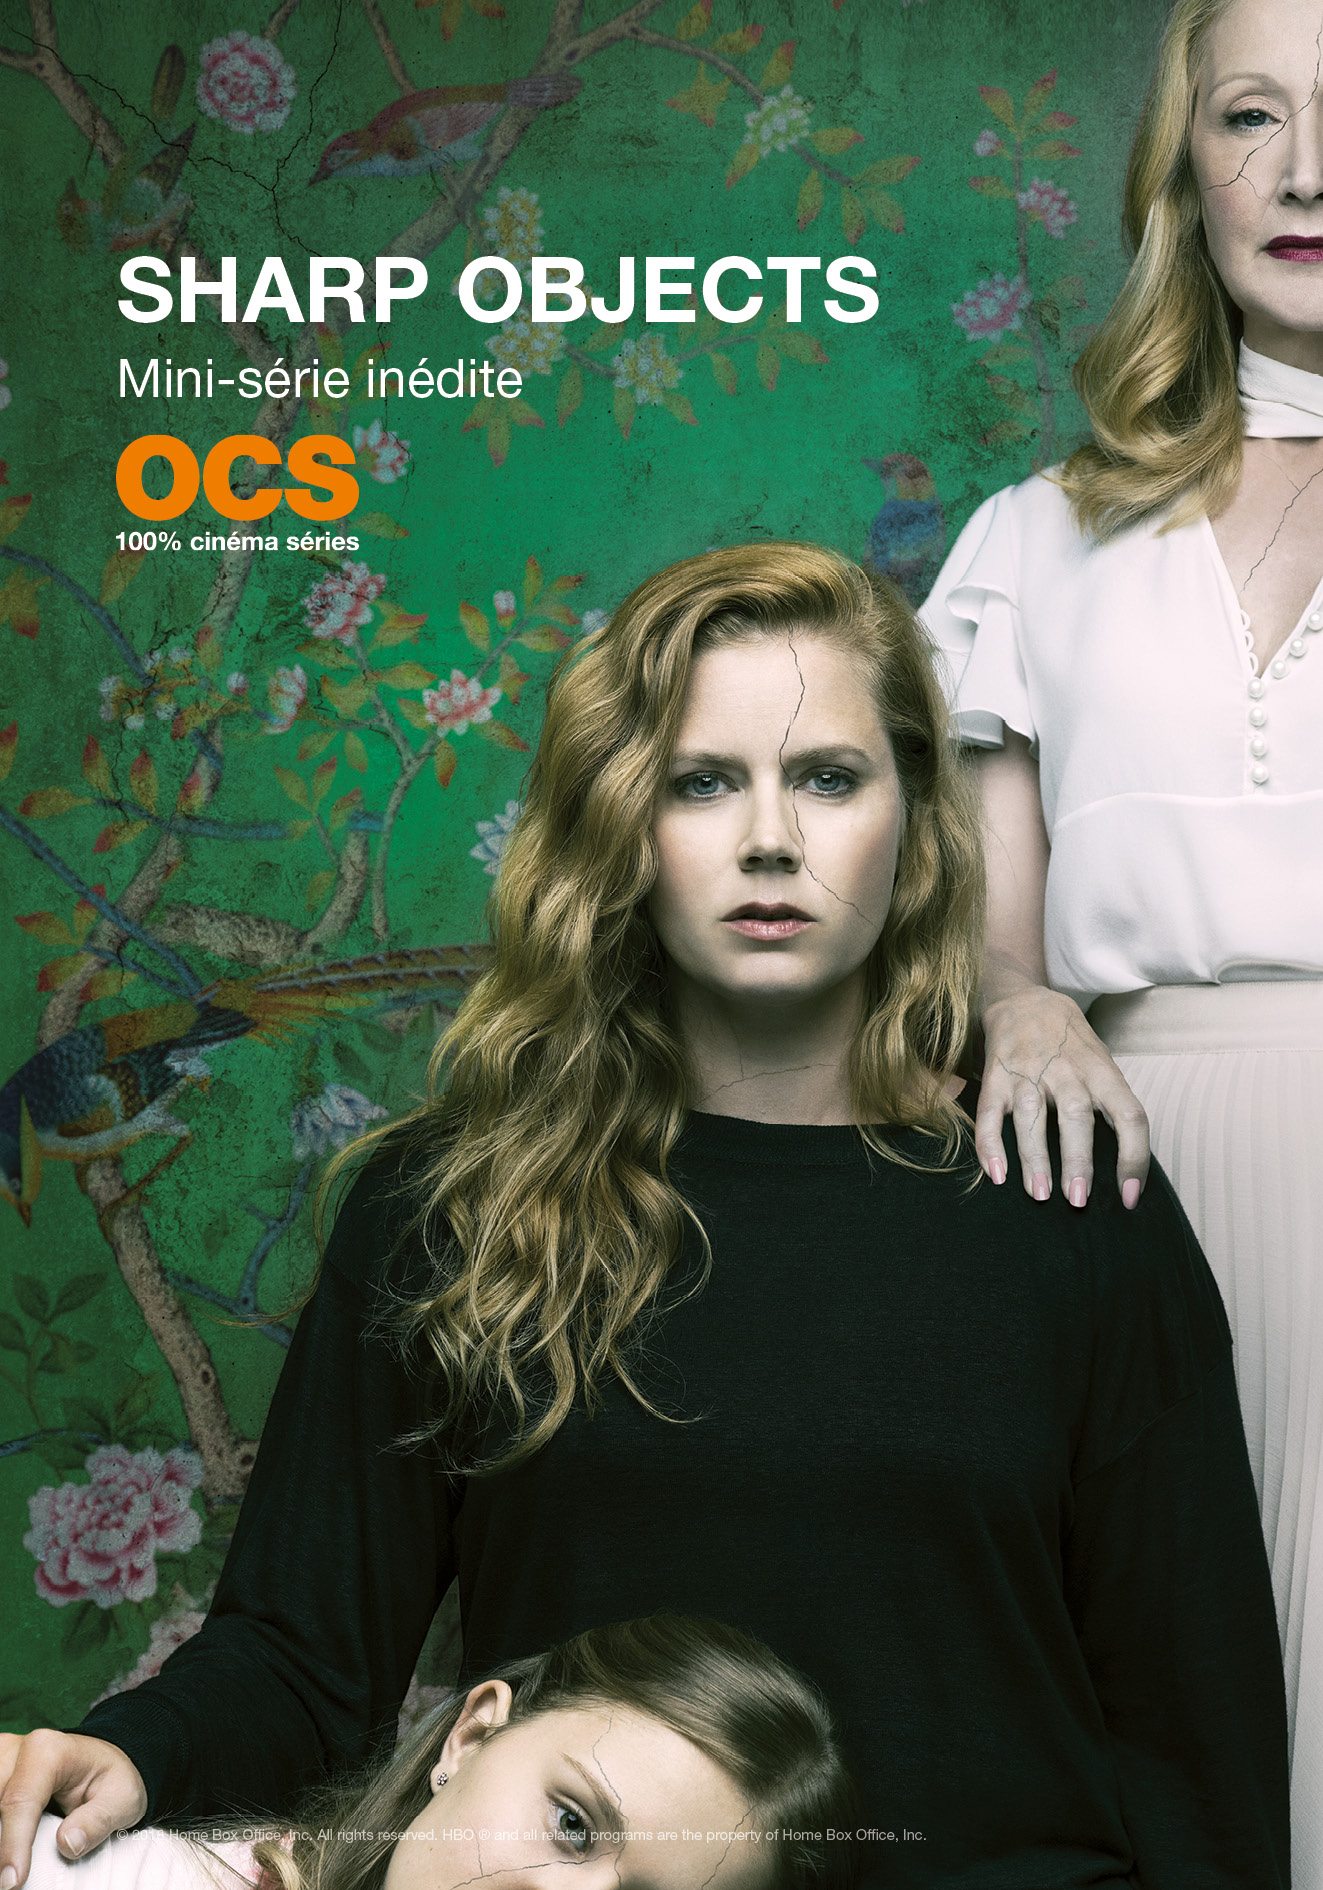 L'affiche de la série “Sharp Objects” © 2018 Home Box Office, Inc. All rights reserved. HBO ® and all related programs are the property of Home Box Office, Inc.